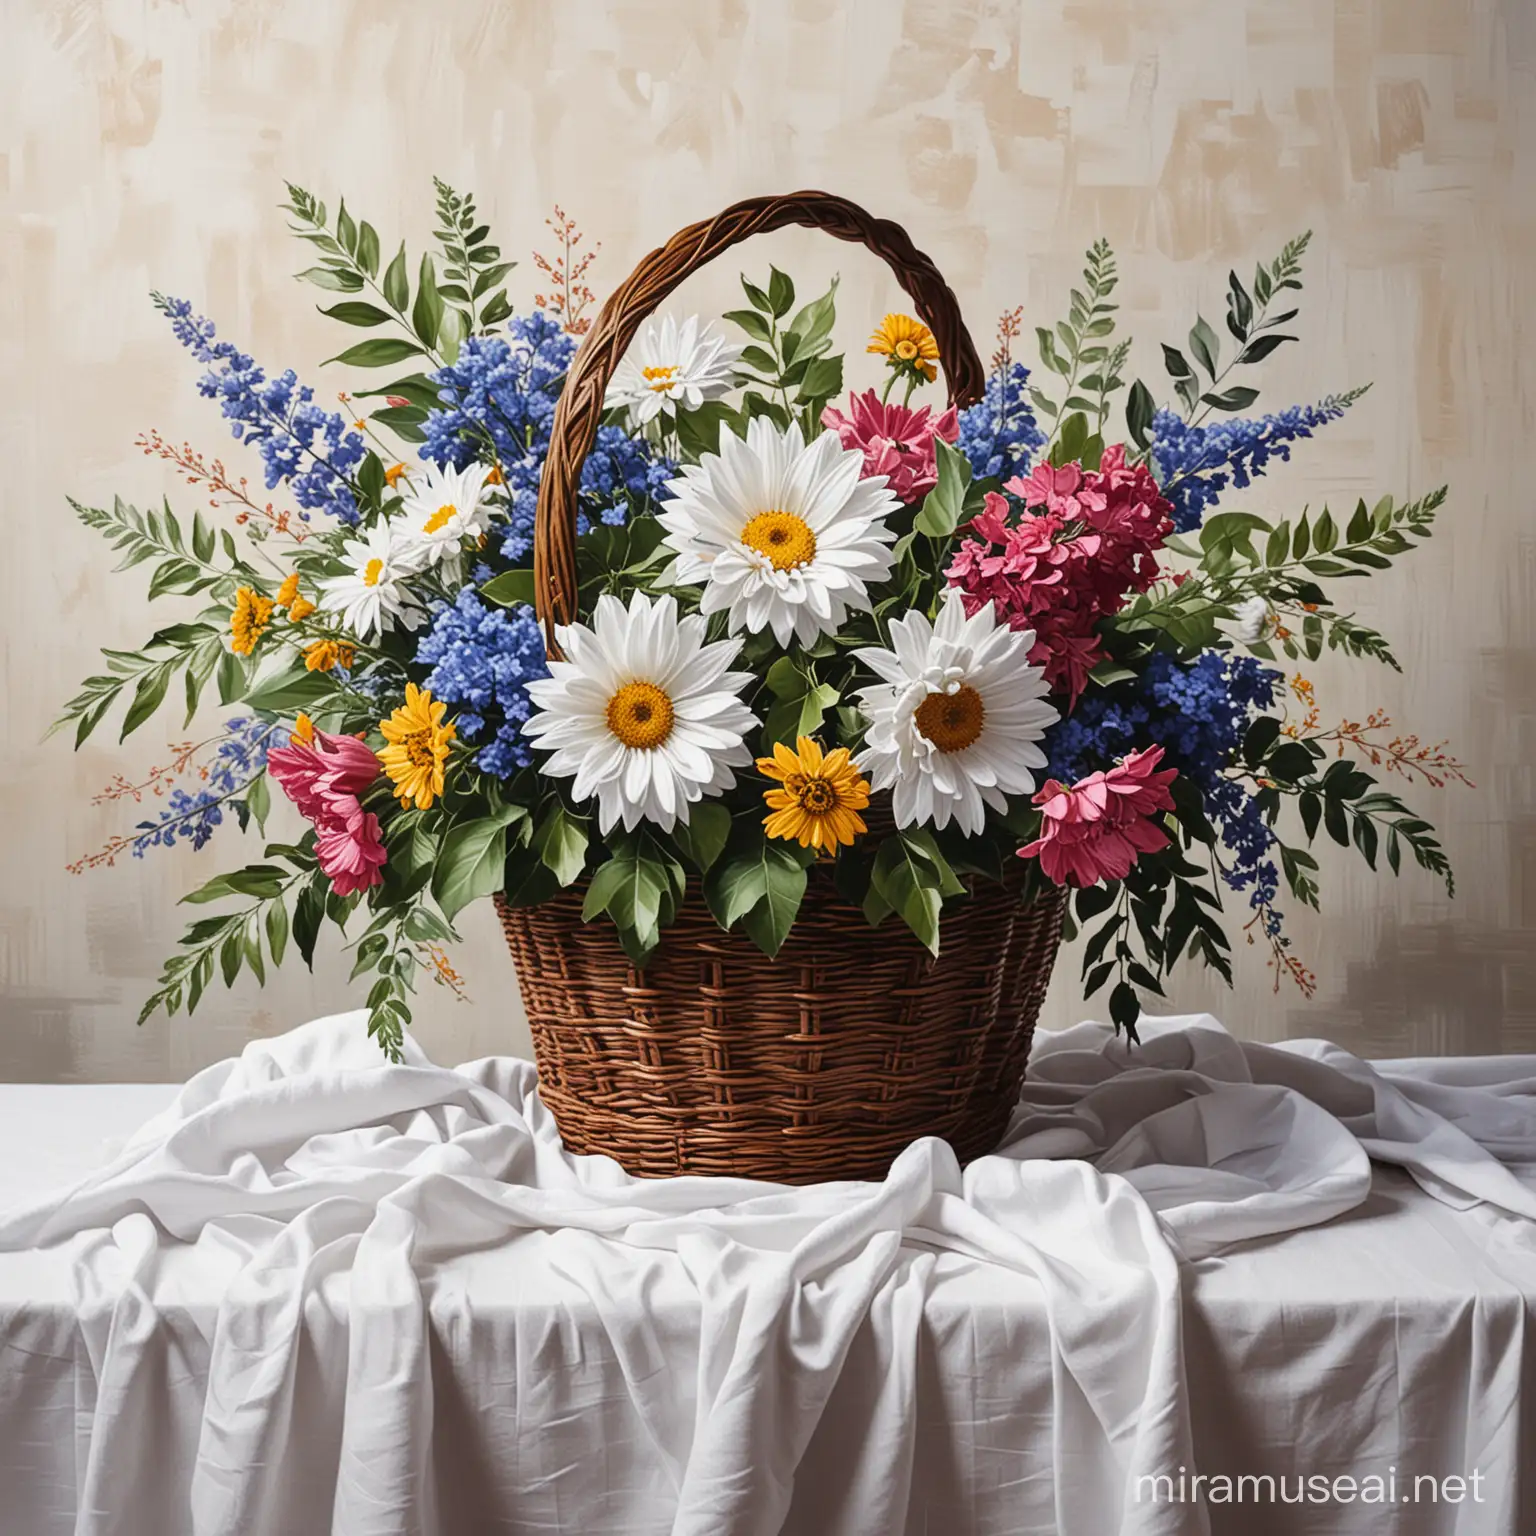 Acrylic painting of a flower basket, on a white cloth on a table, high contrast, bold brush strokes, high resolution